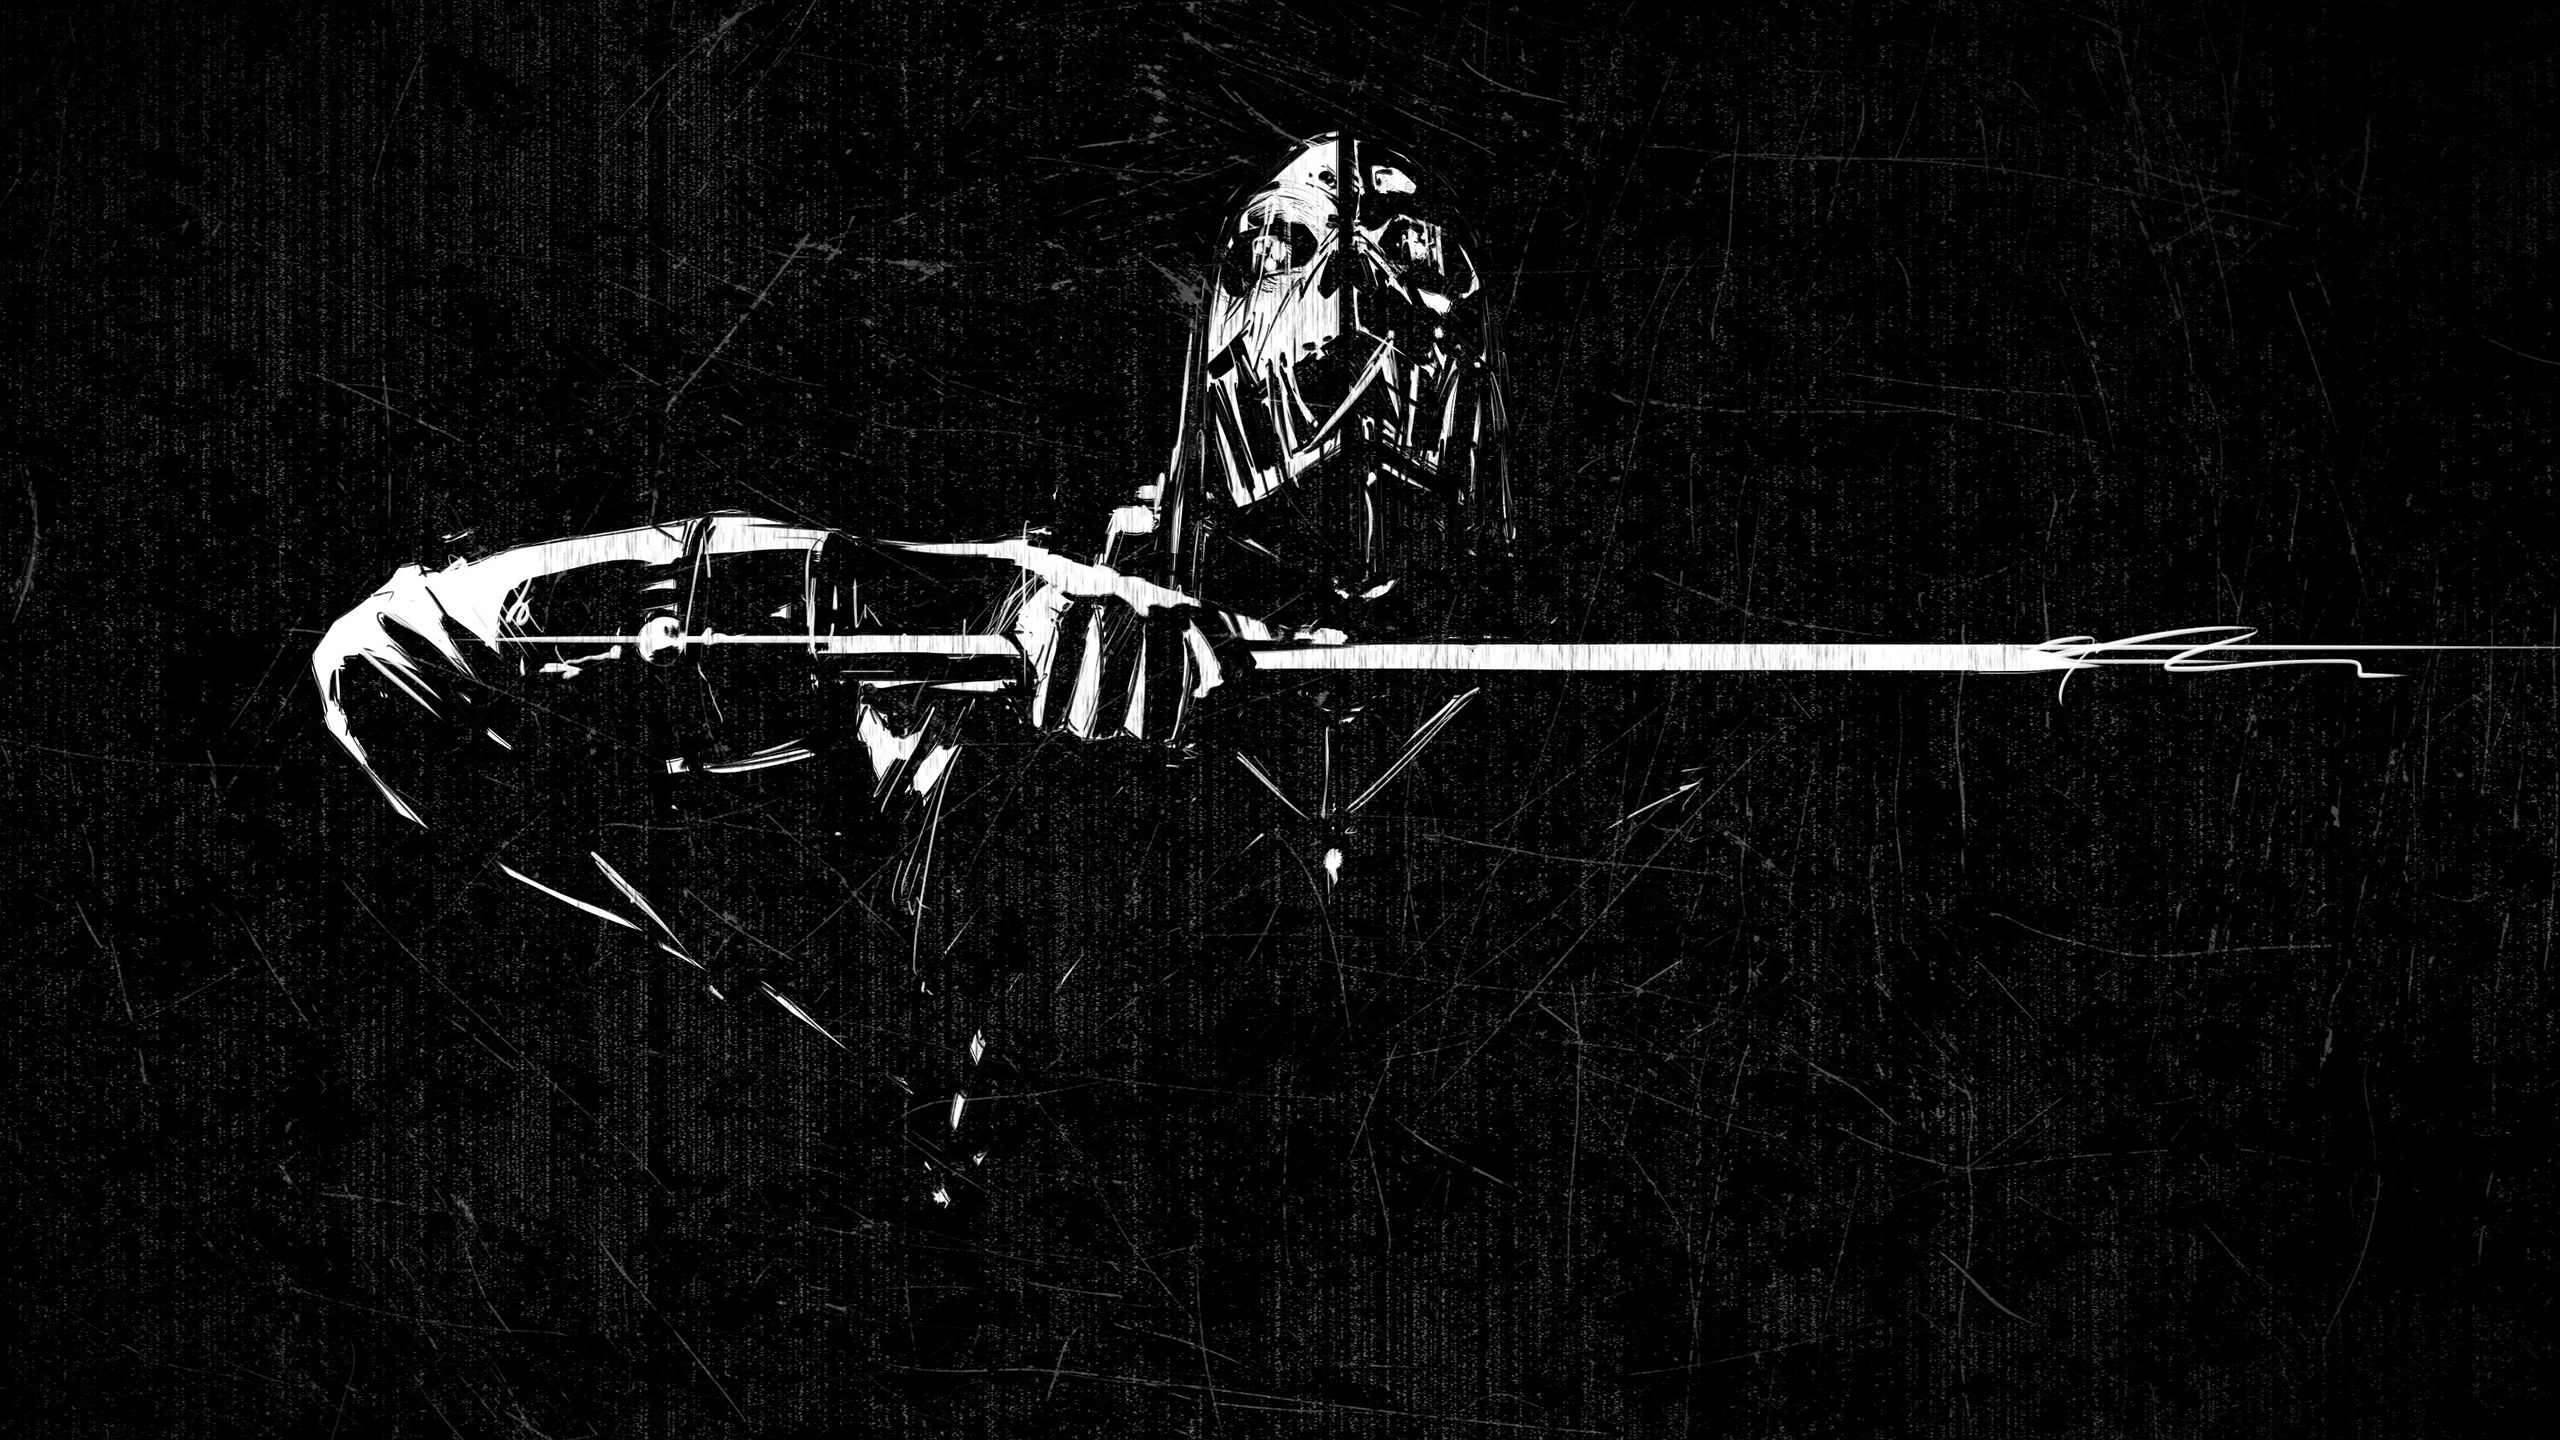 Dishonored Scraped Minimal for 2560x1440 HDTV resolution